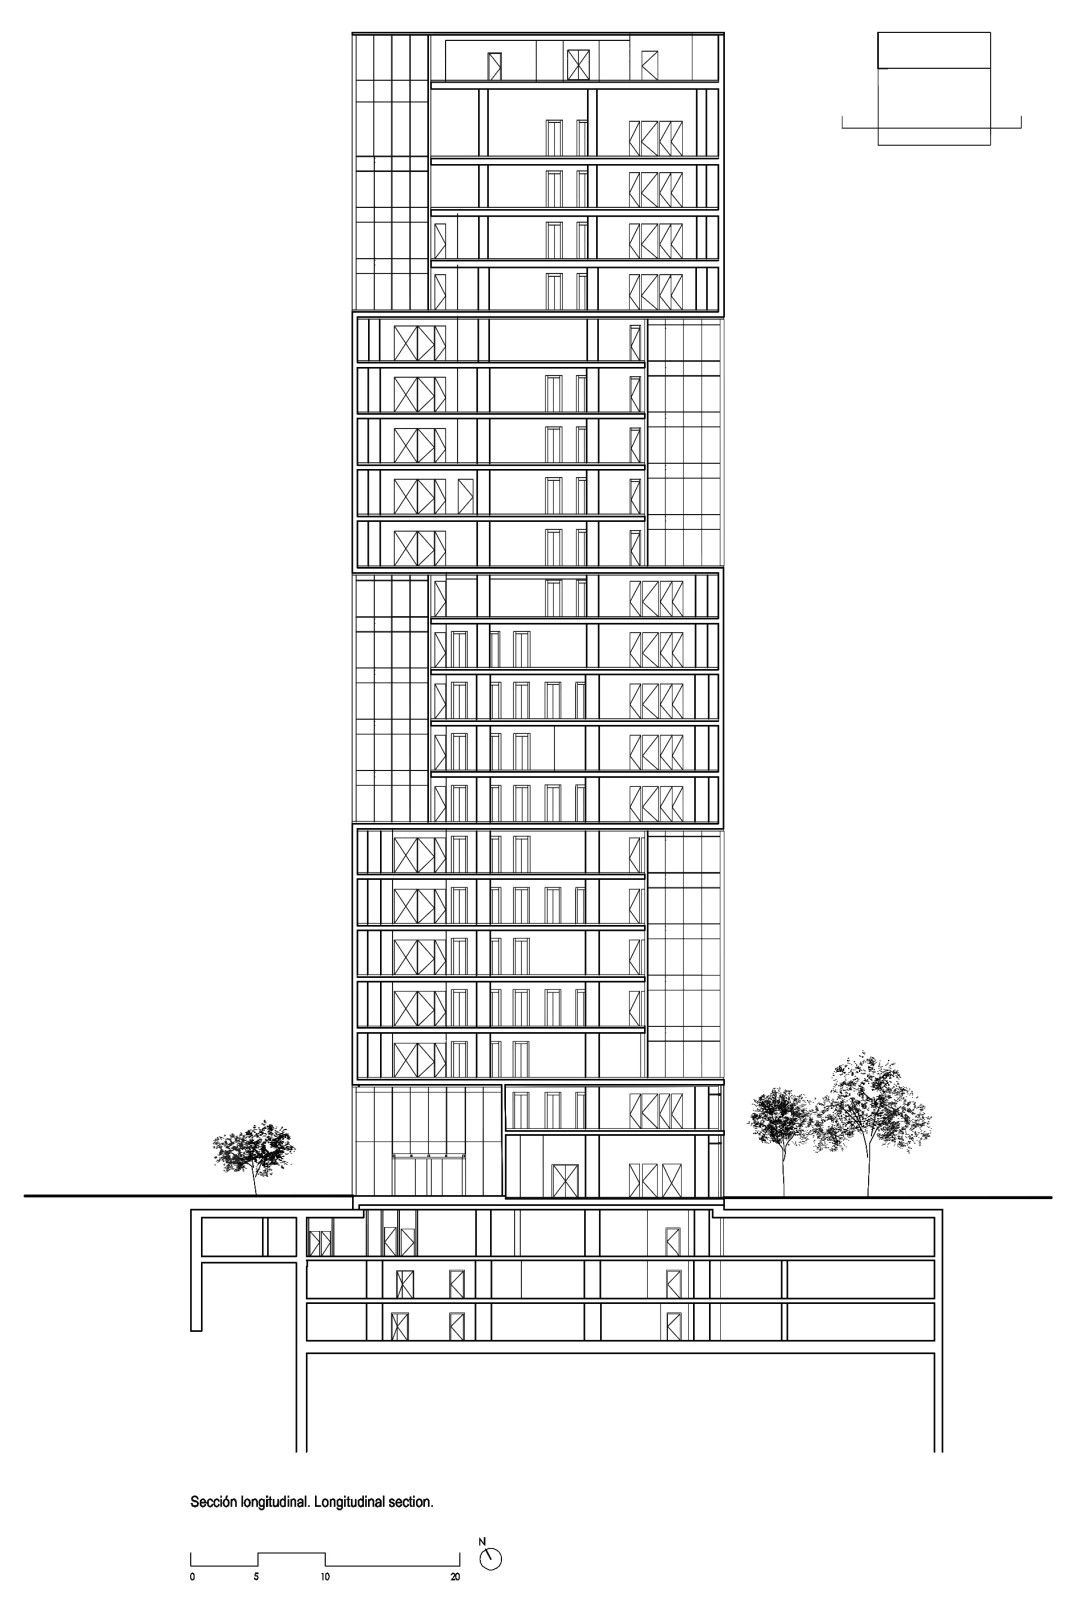 Office Tower in Plaza Europa 34